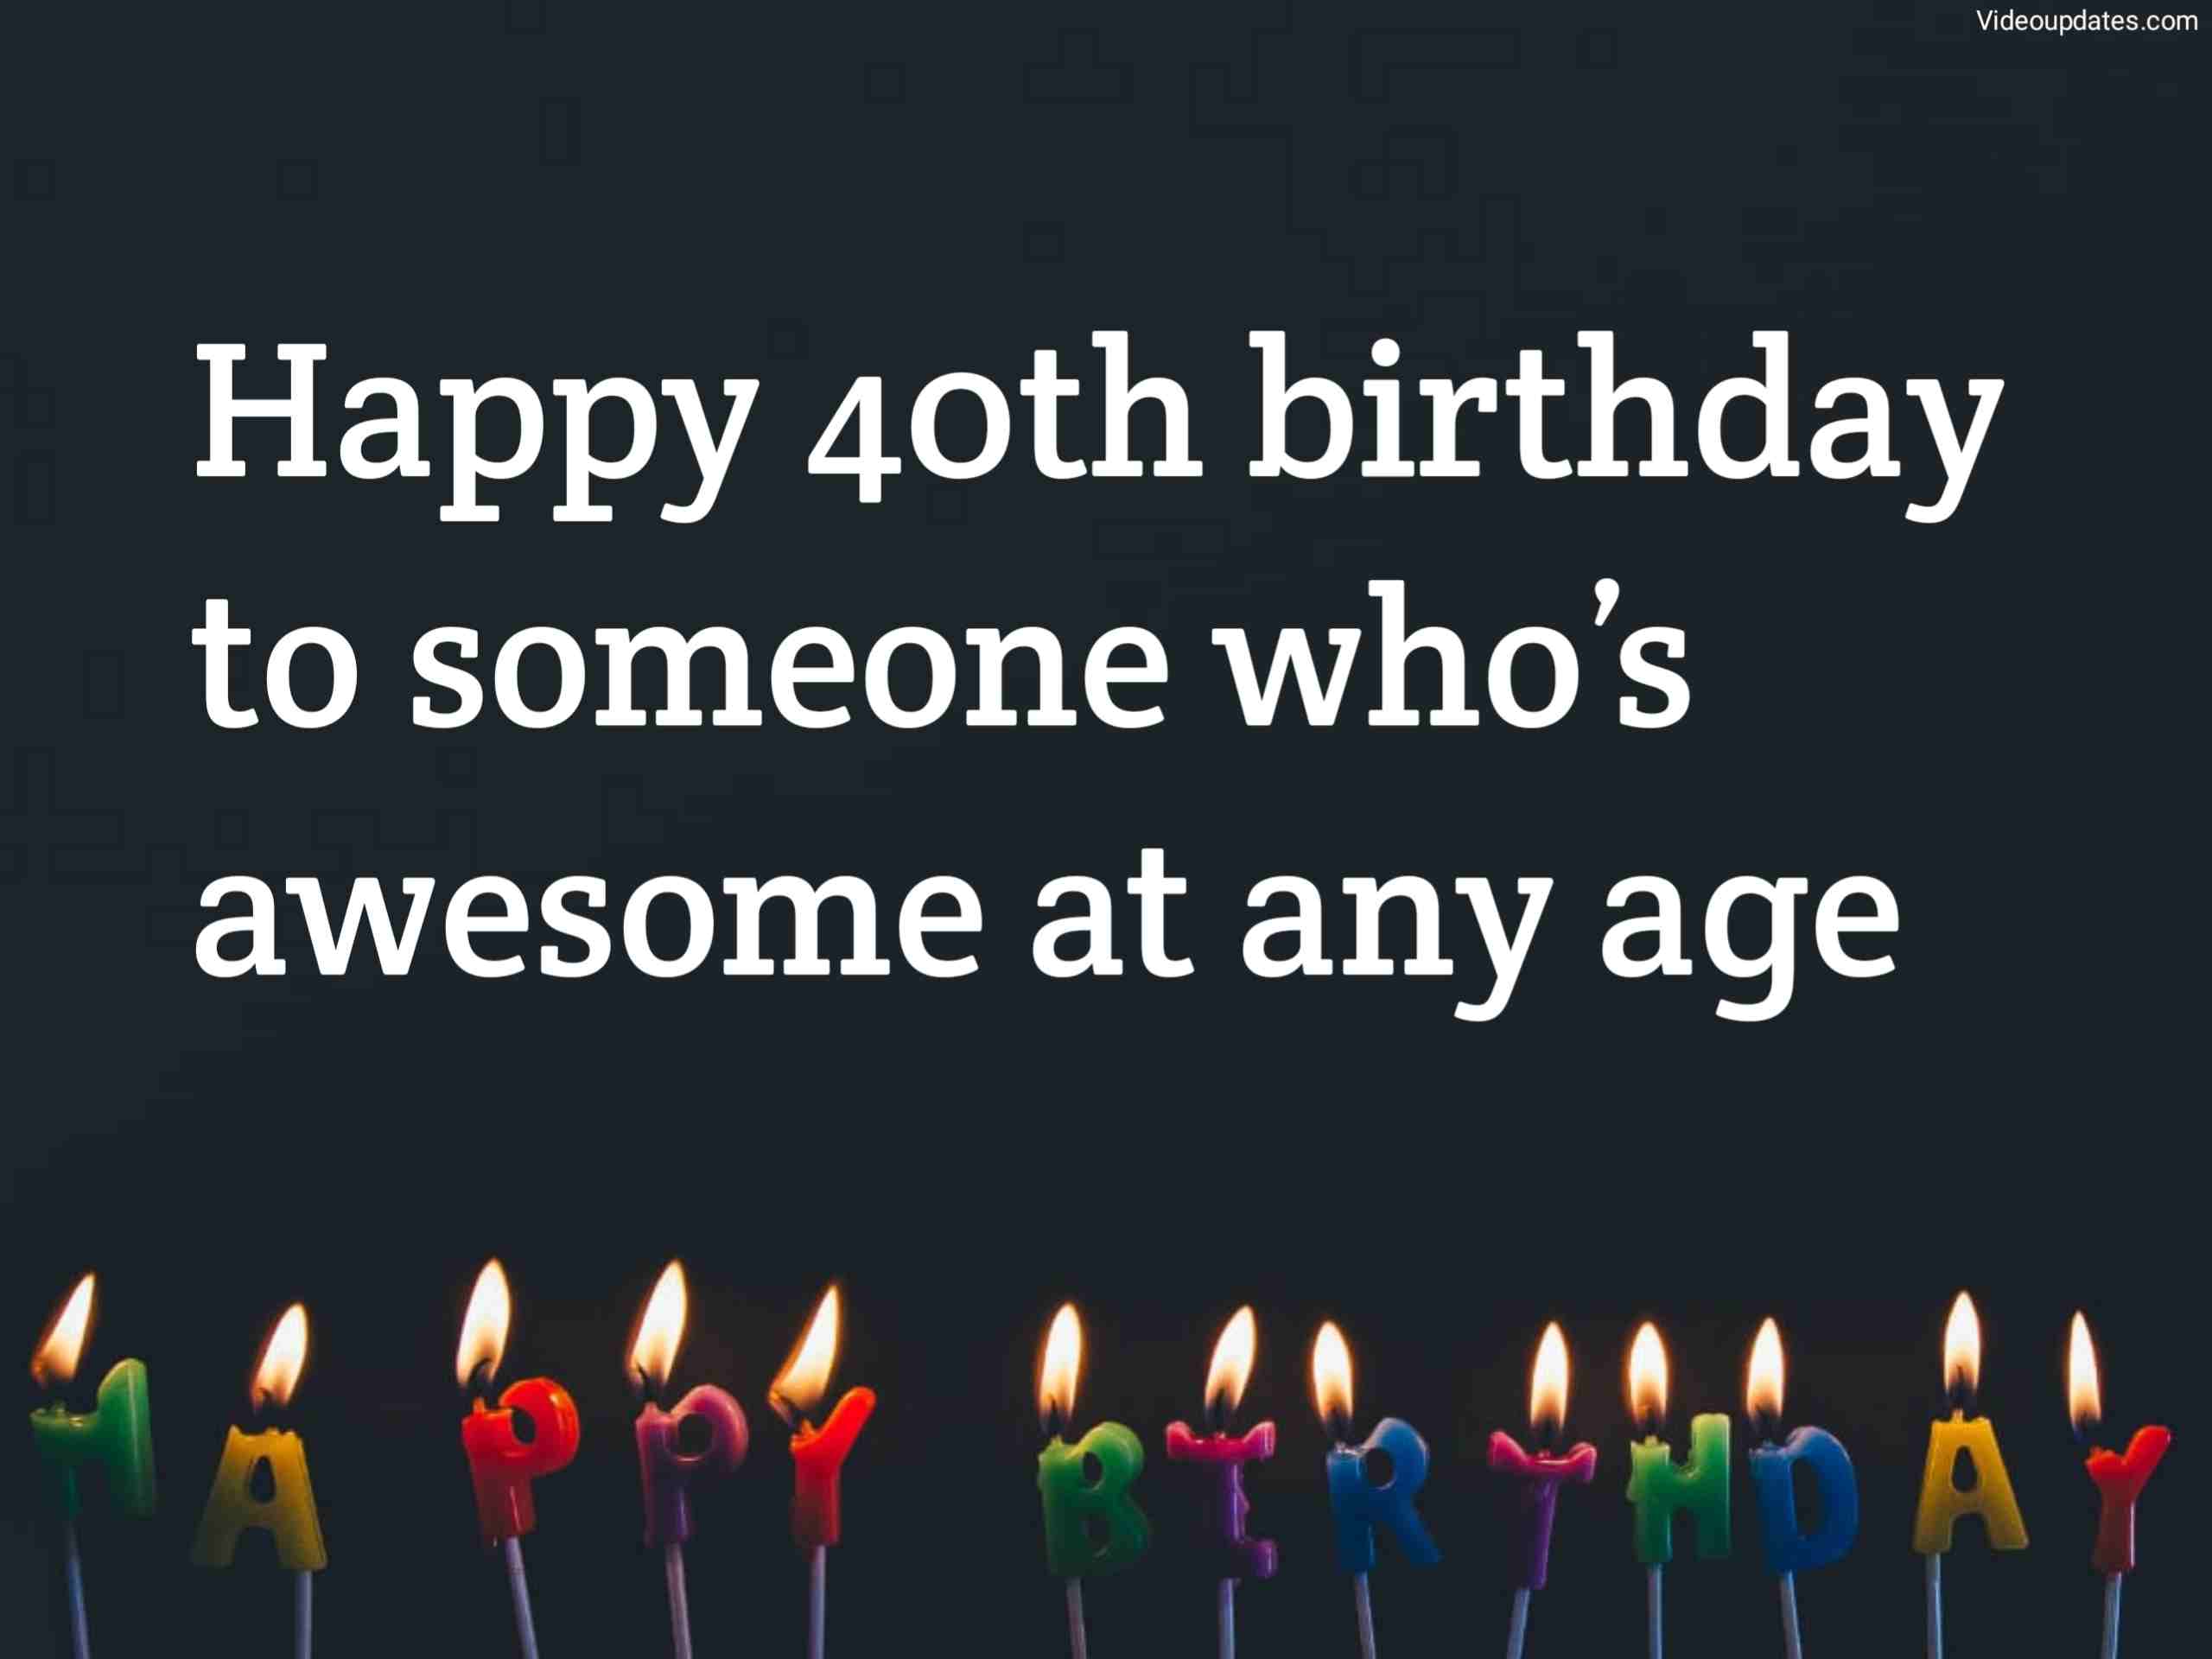 Funny 40th Birthday Wishes